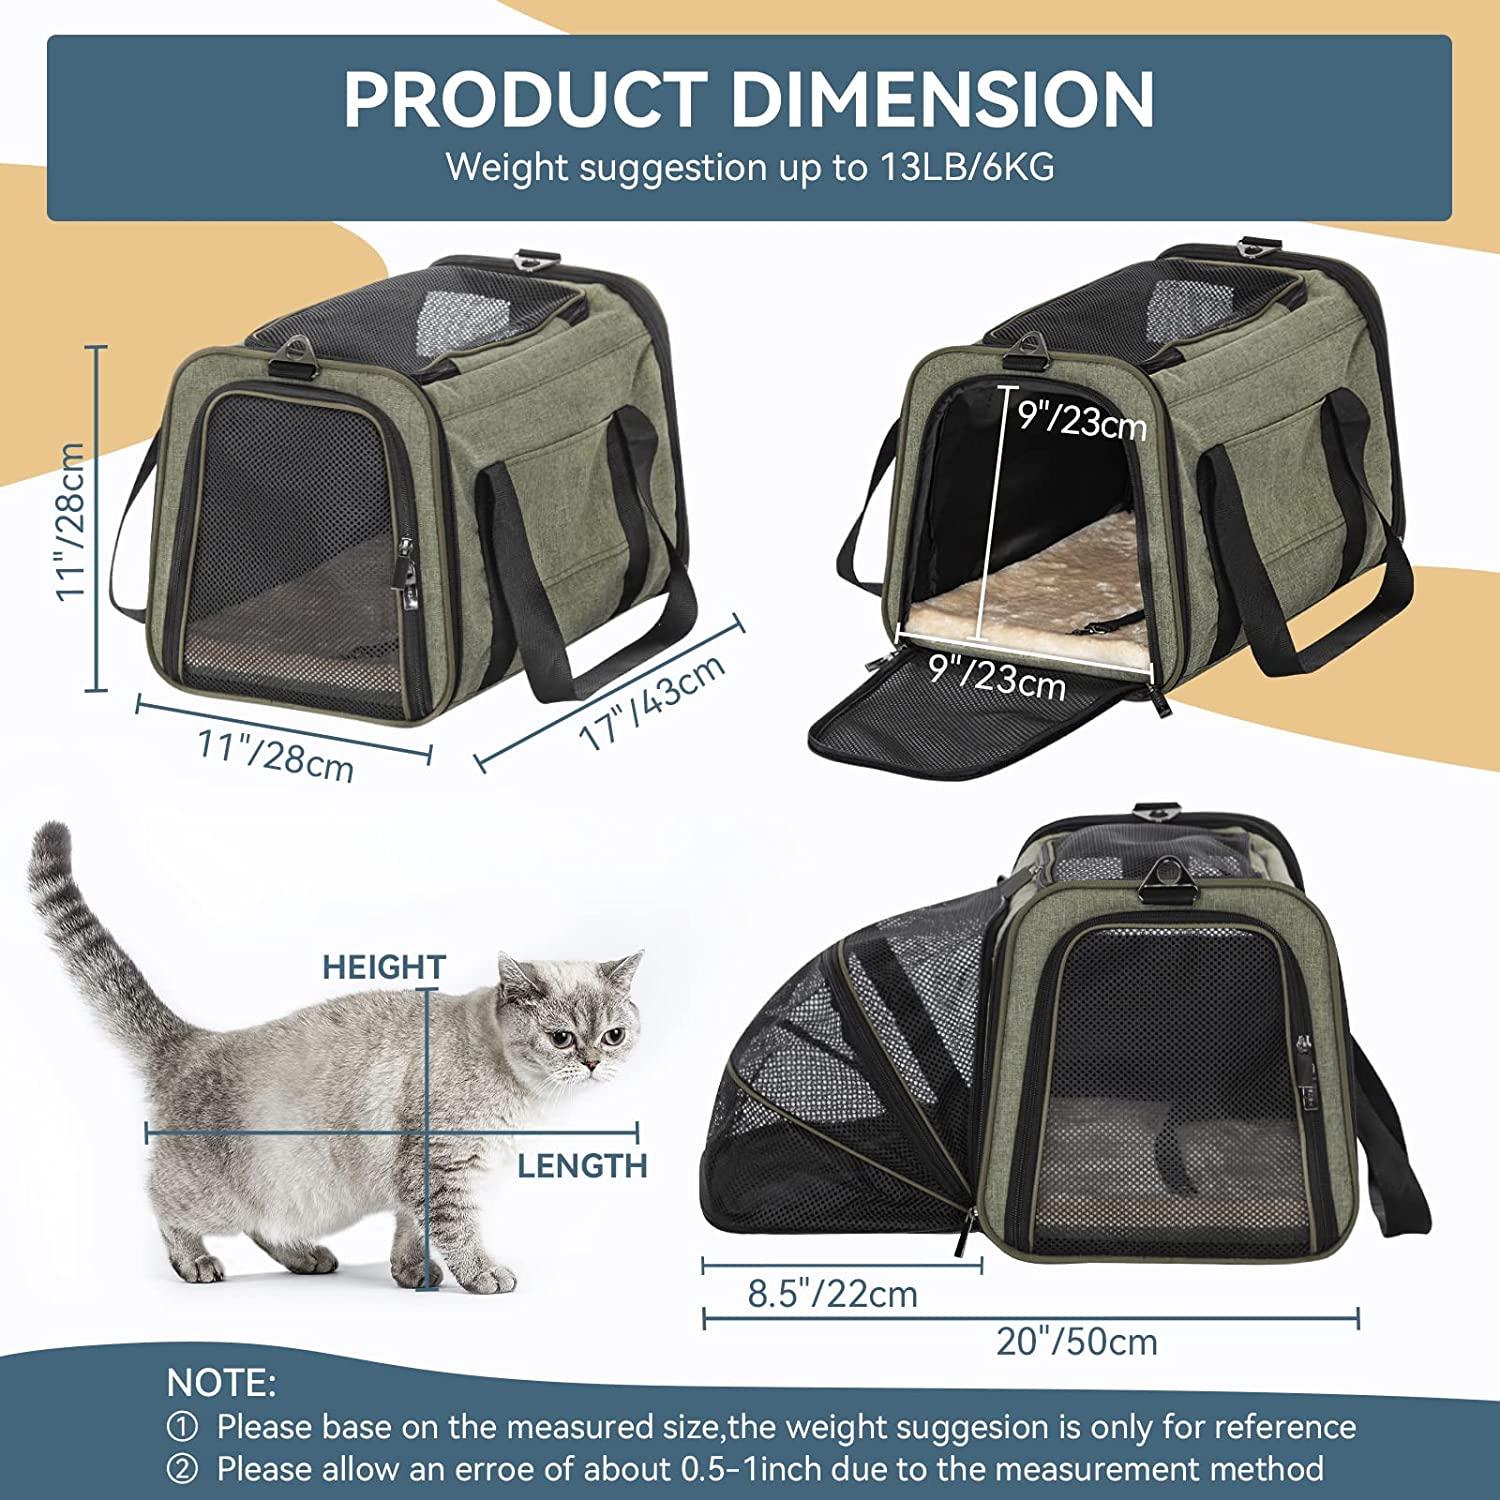 Cat carrier Pet bag Ventilated Safe Foldable Travel on plane Puppy